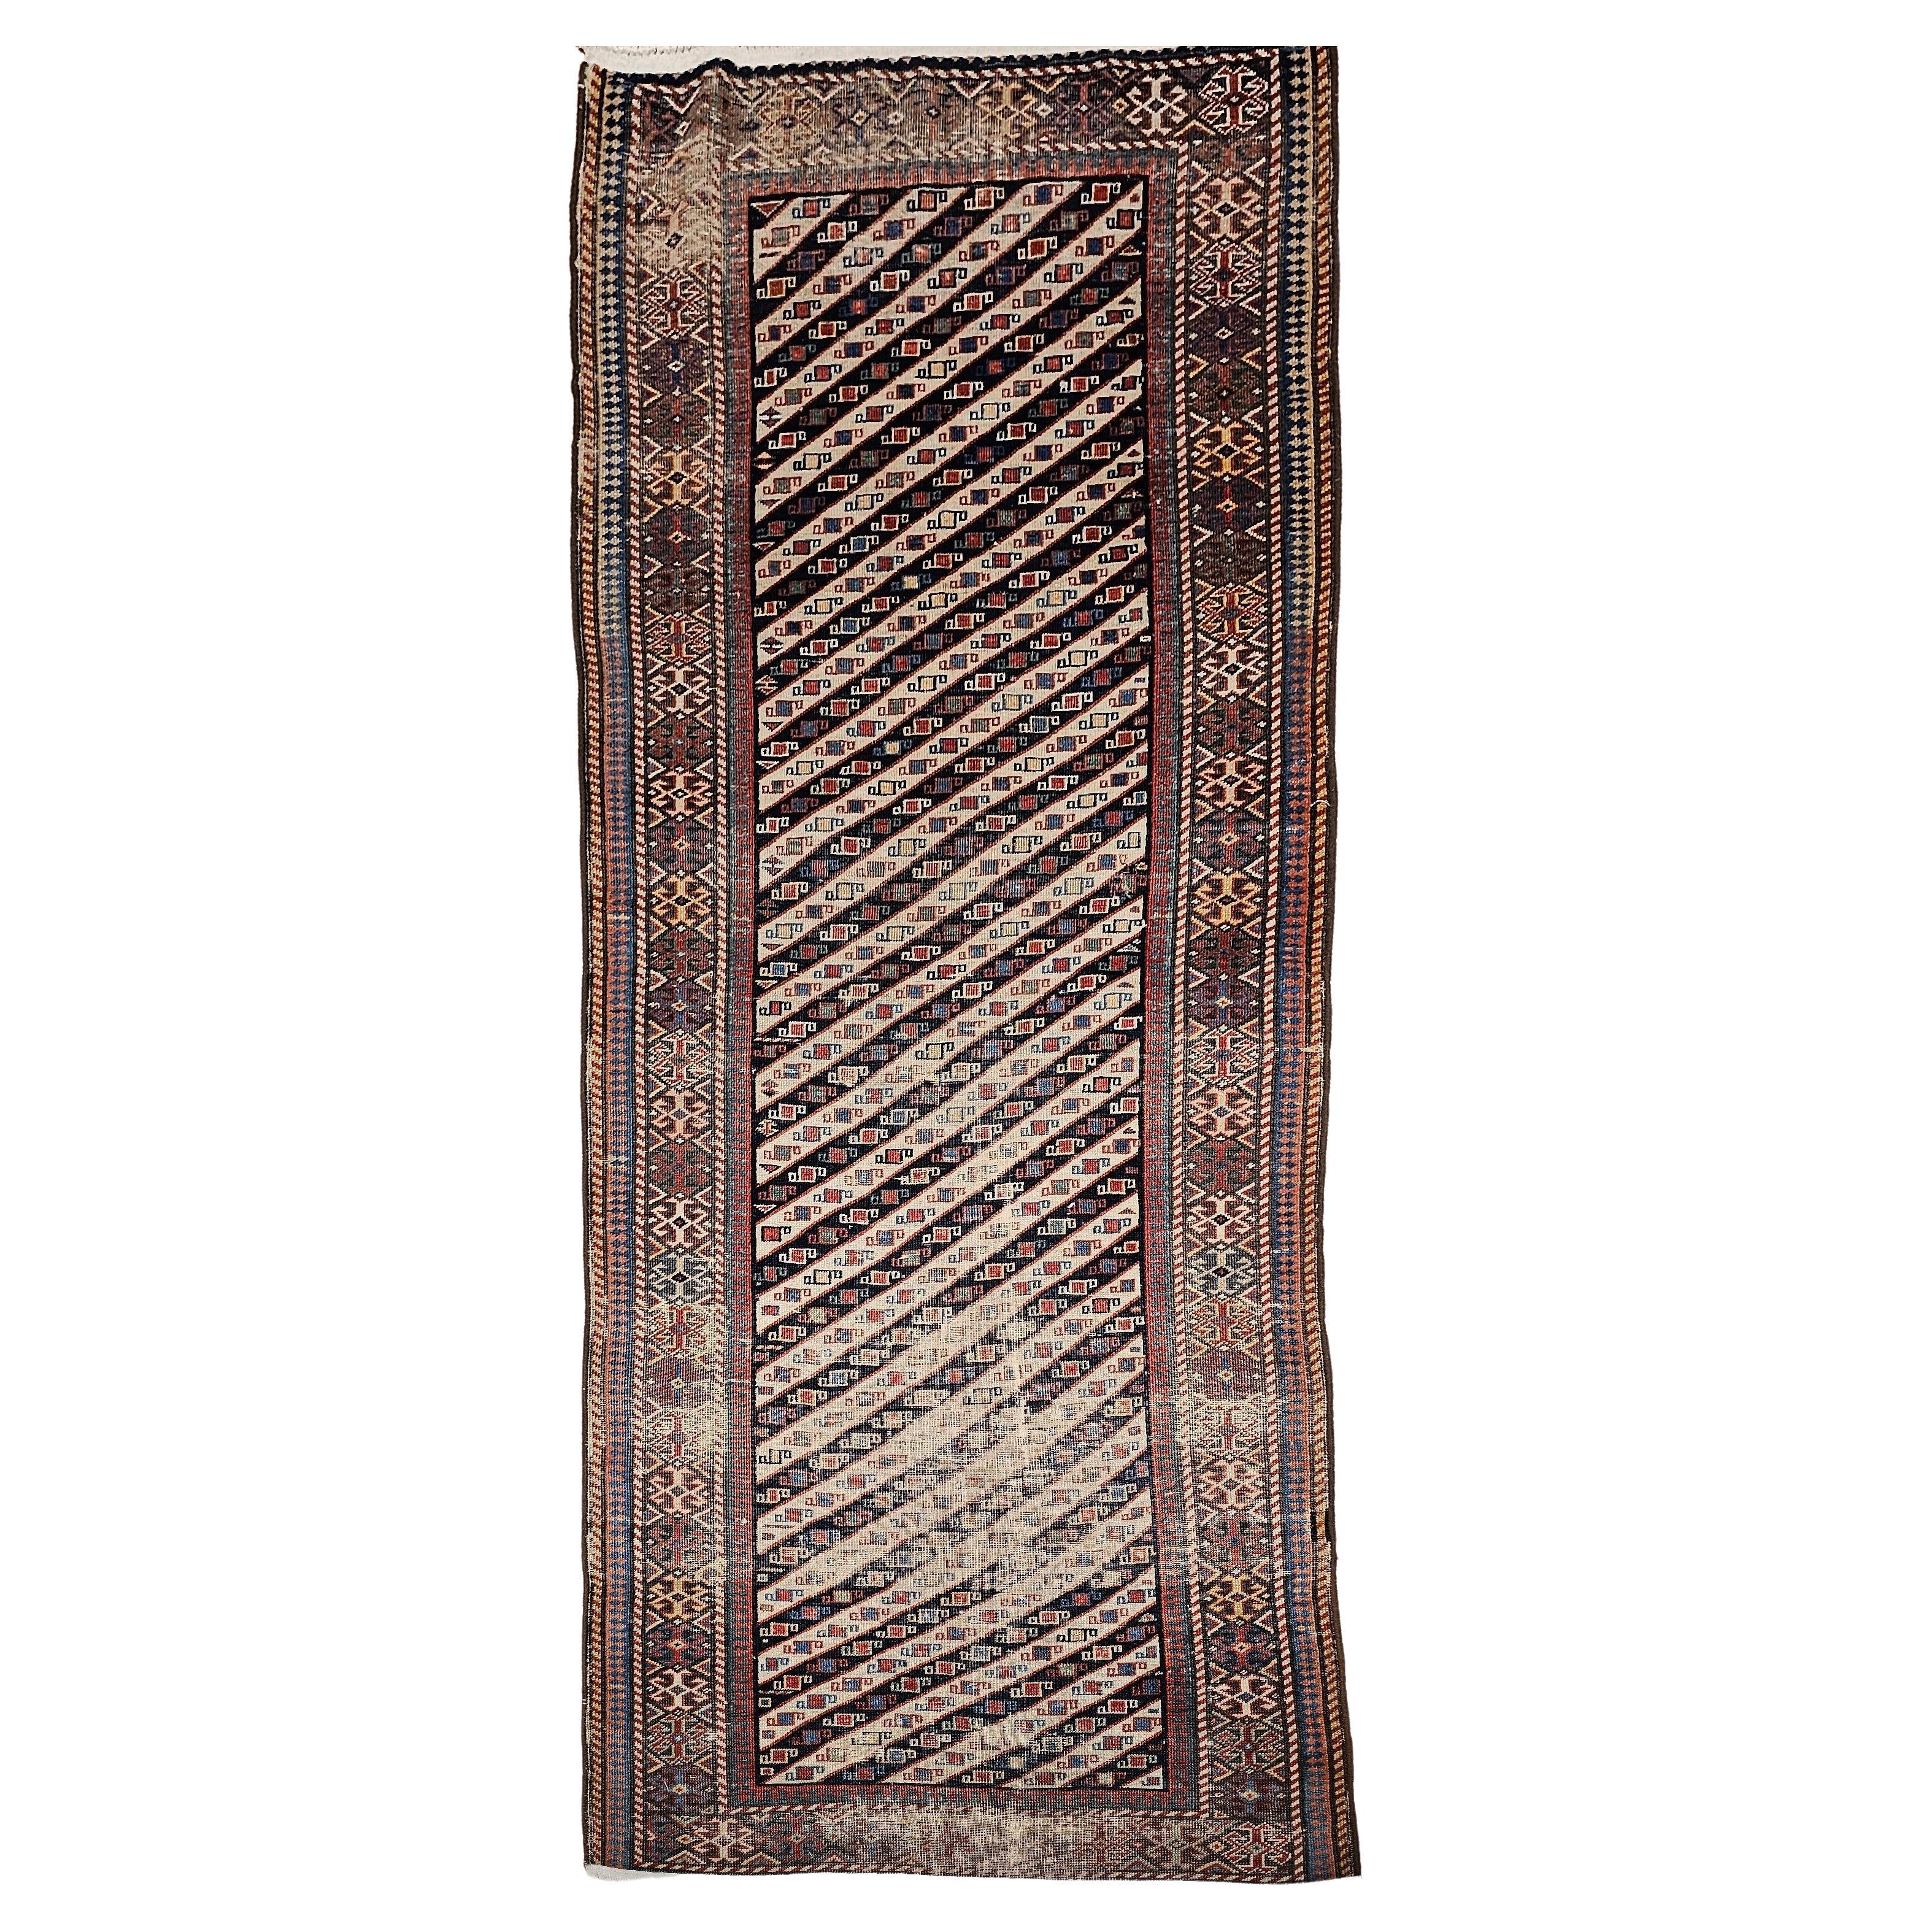 Beautiful and colorful vintage Caucasian Gendje Kazak runner from the late 1800s.  This Kazak is unusually large with the “Sevan” pattern set in a dark red color field.  The Gendje runner is in an allover skewed stripe pattern with an alternating